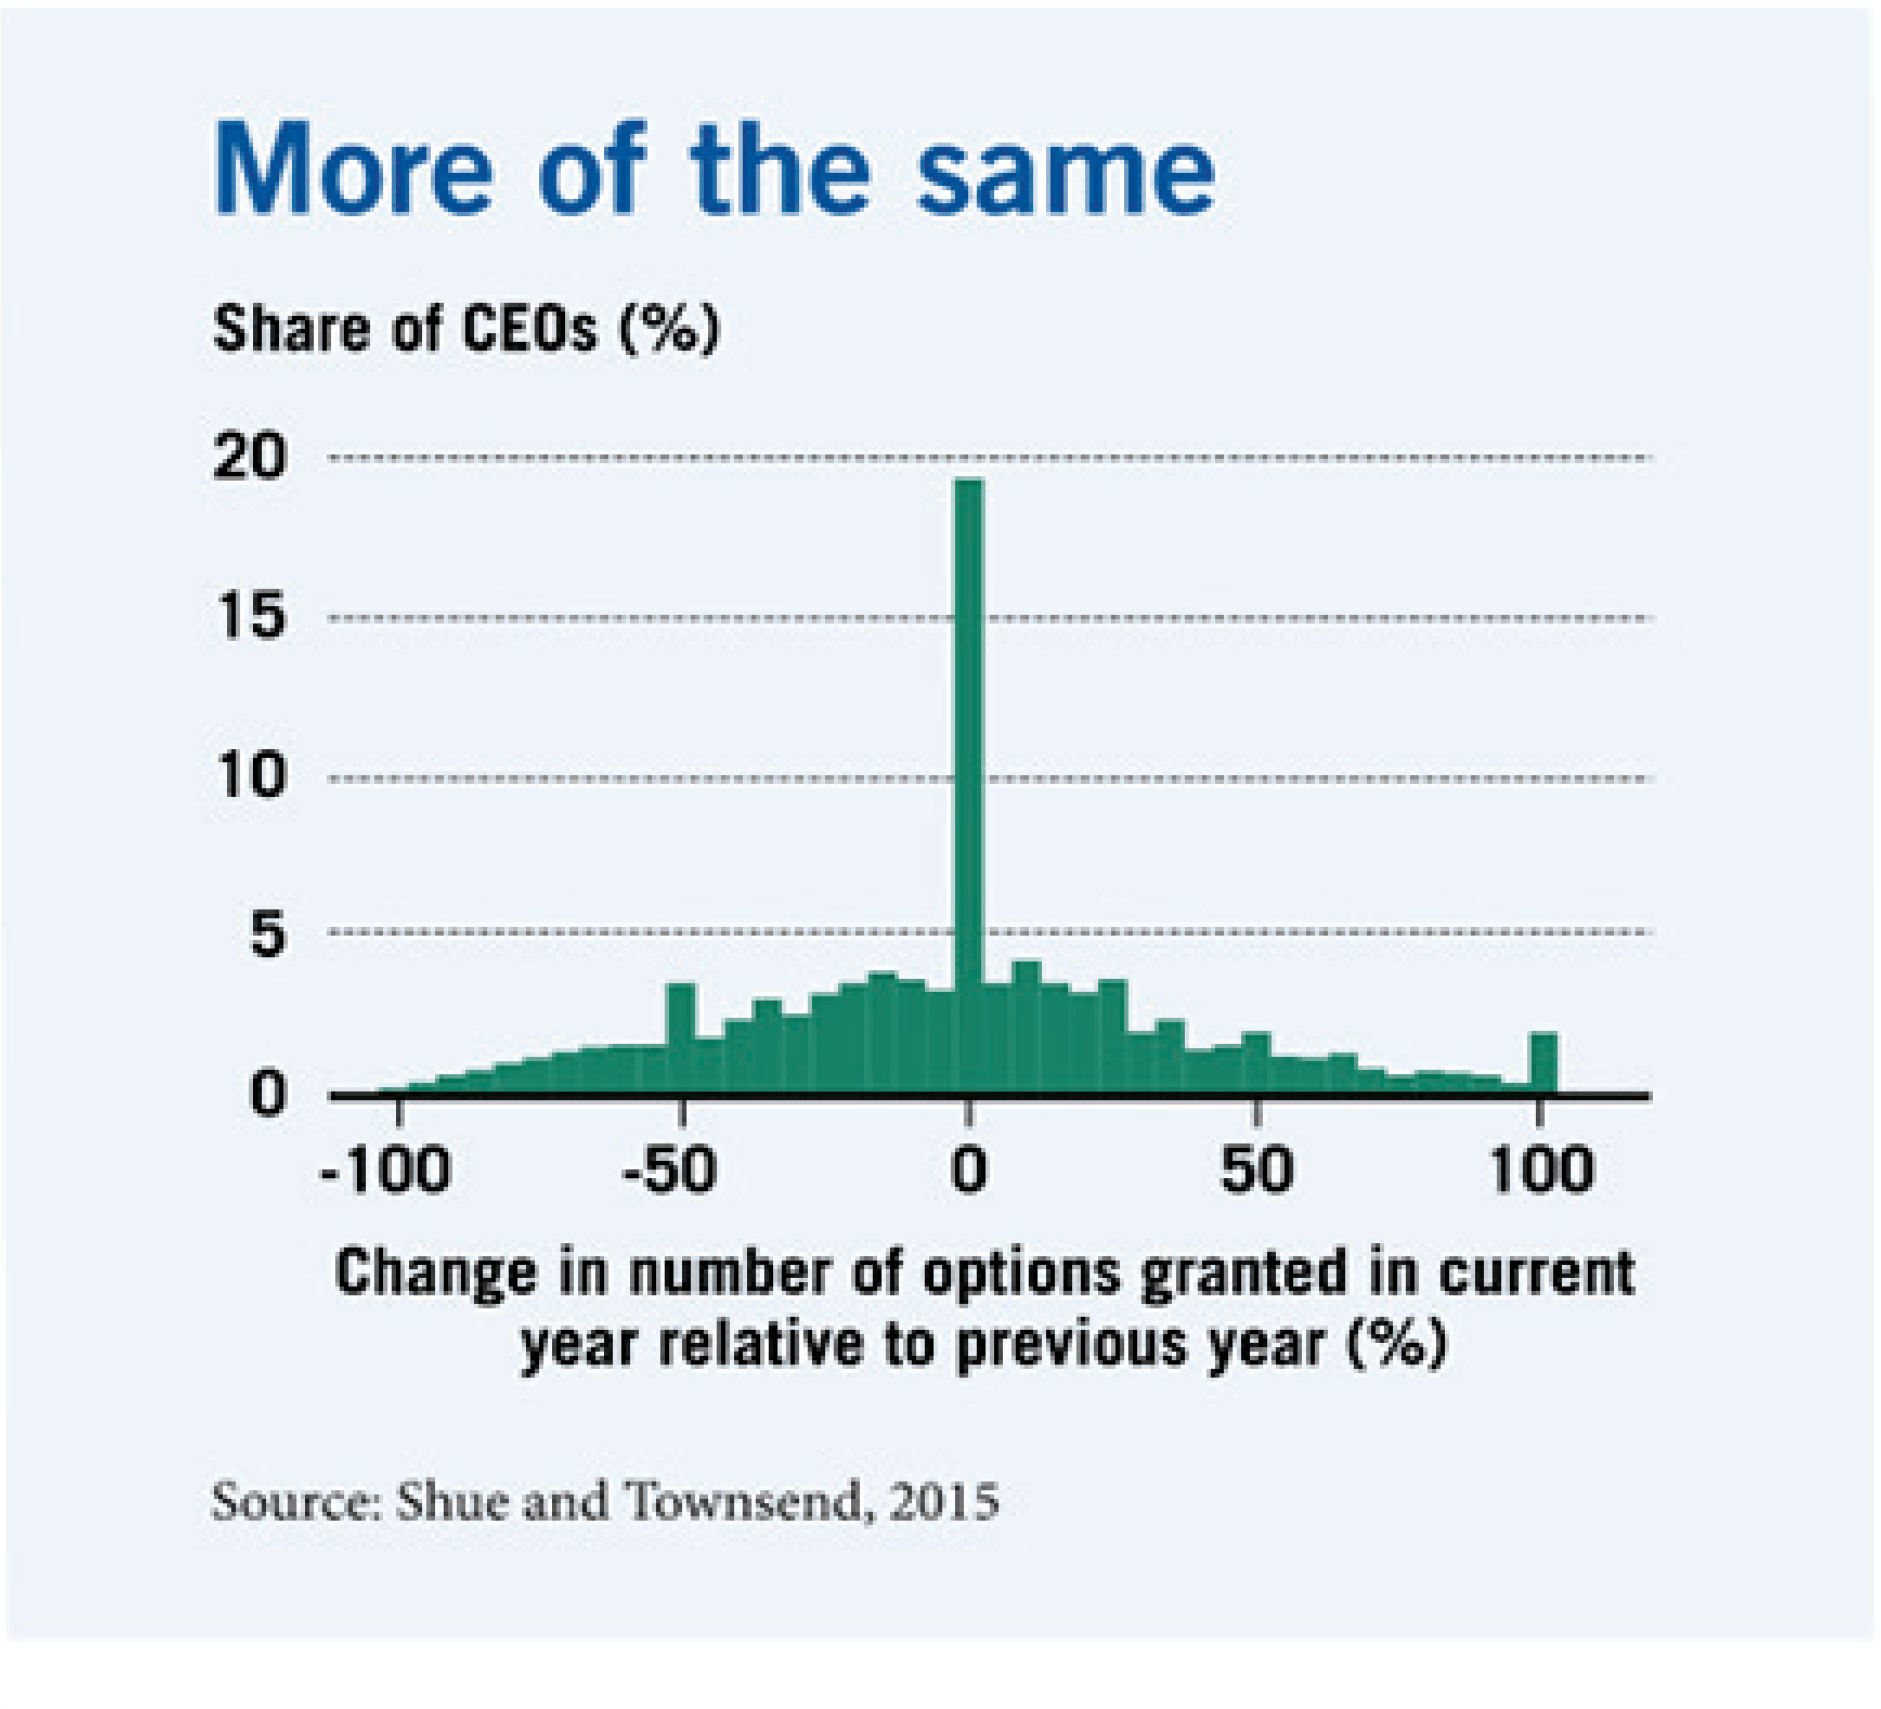 A histogram column bar chart plotting the change in the number of stock options granted to a CEO relative to the previous year, with the share of all CEOs on the y-axis, and the percentage change in options on the x-axis. With the largest bar, nearly twenty percent of CEOs are at zero on the x-axis, indicating that they have received the same number of options as they did last year. No other percentage change in options reaches fiver percent.